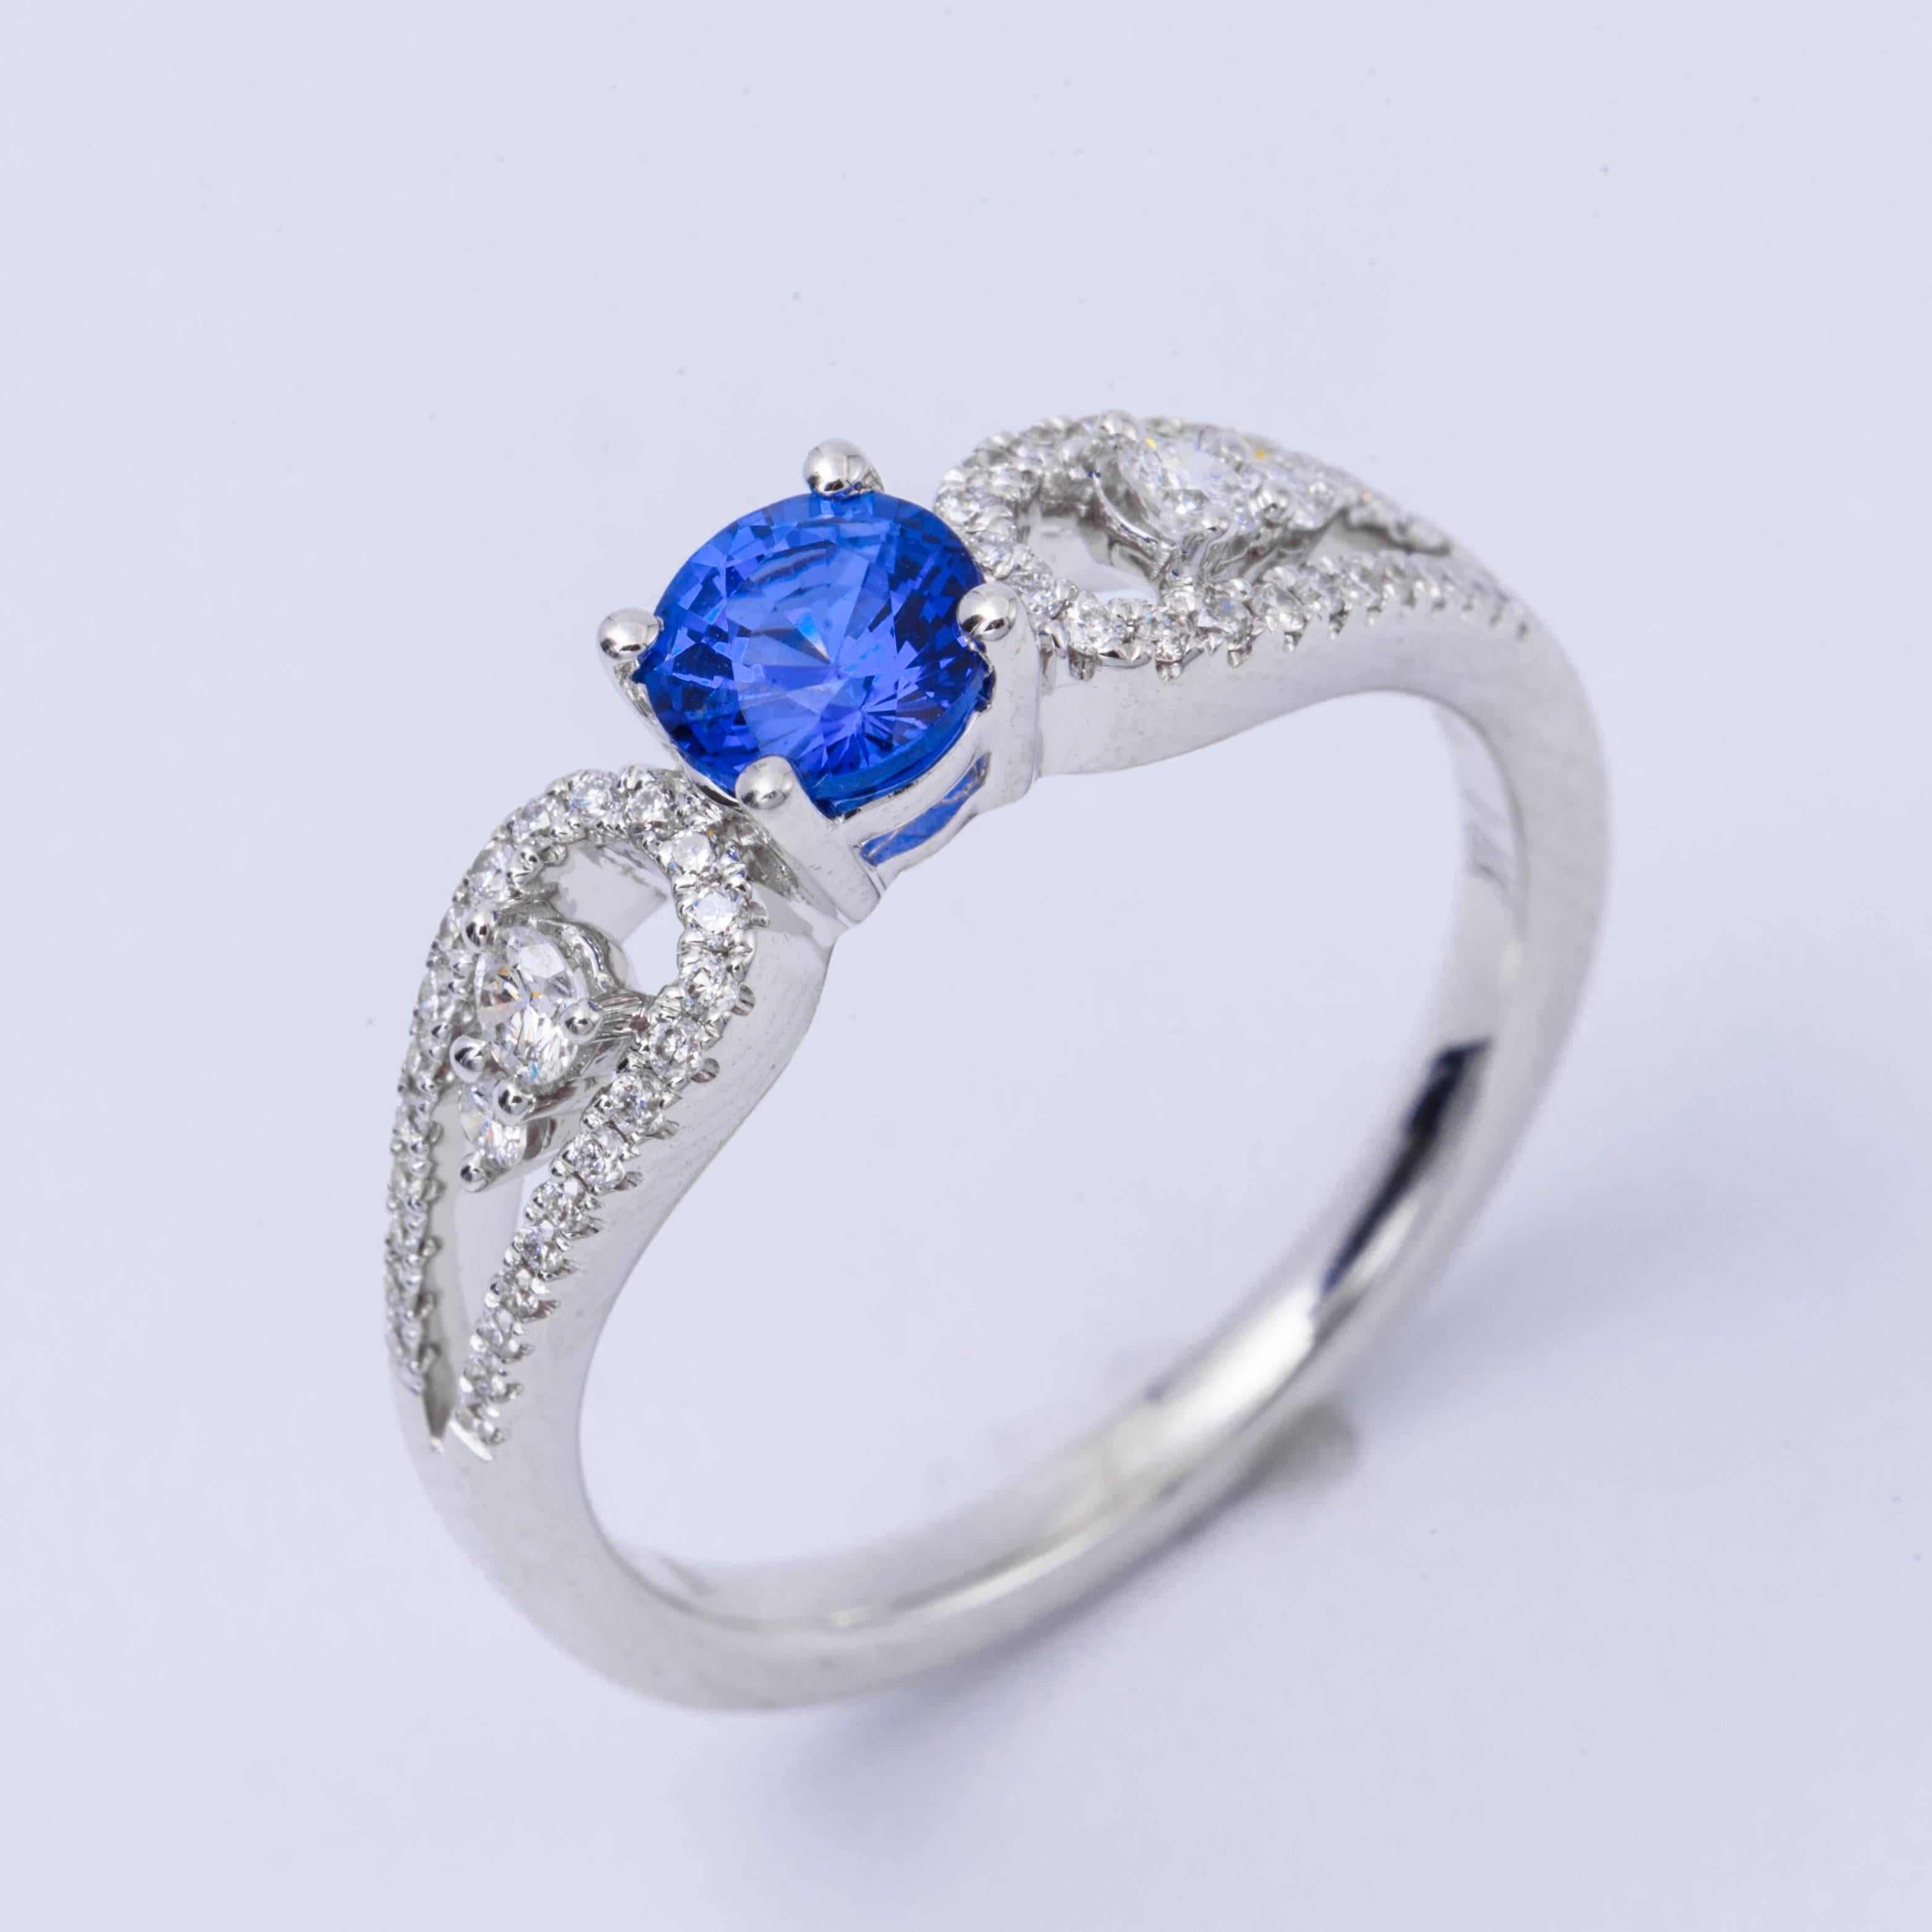 Style: 14k White Ceylon Sapphire  Diamond Engagement Ring
Material: 14k White Gold
Gemstone Details:  Sapphire approximately 0.64 ct. 5 mm
Diamond Details: Approximately 0.20 ctw of diamonds. Diamonds are H in color and SI in clarity.
Ring Size: